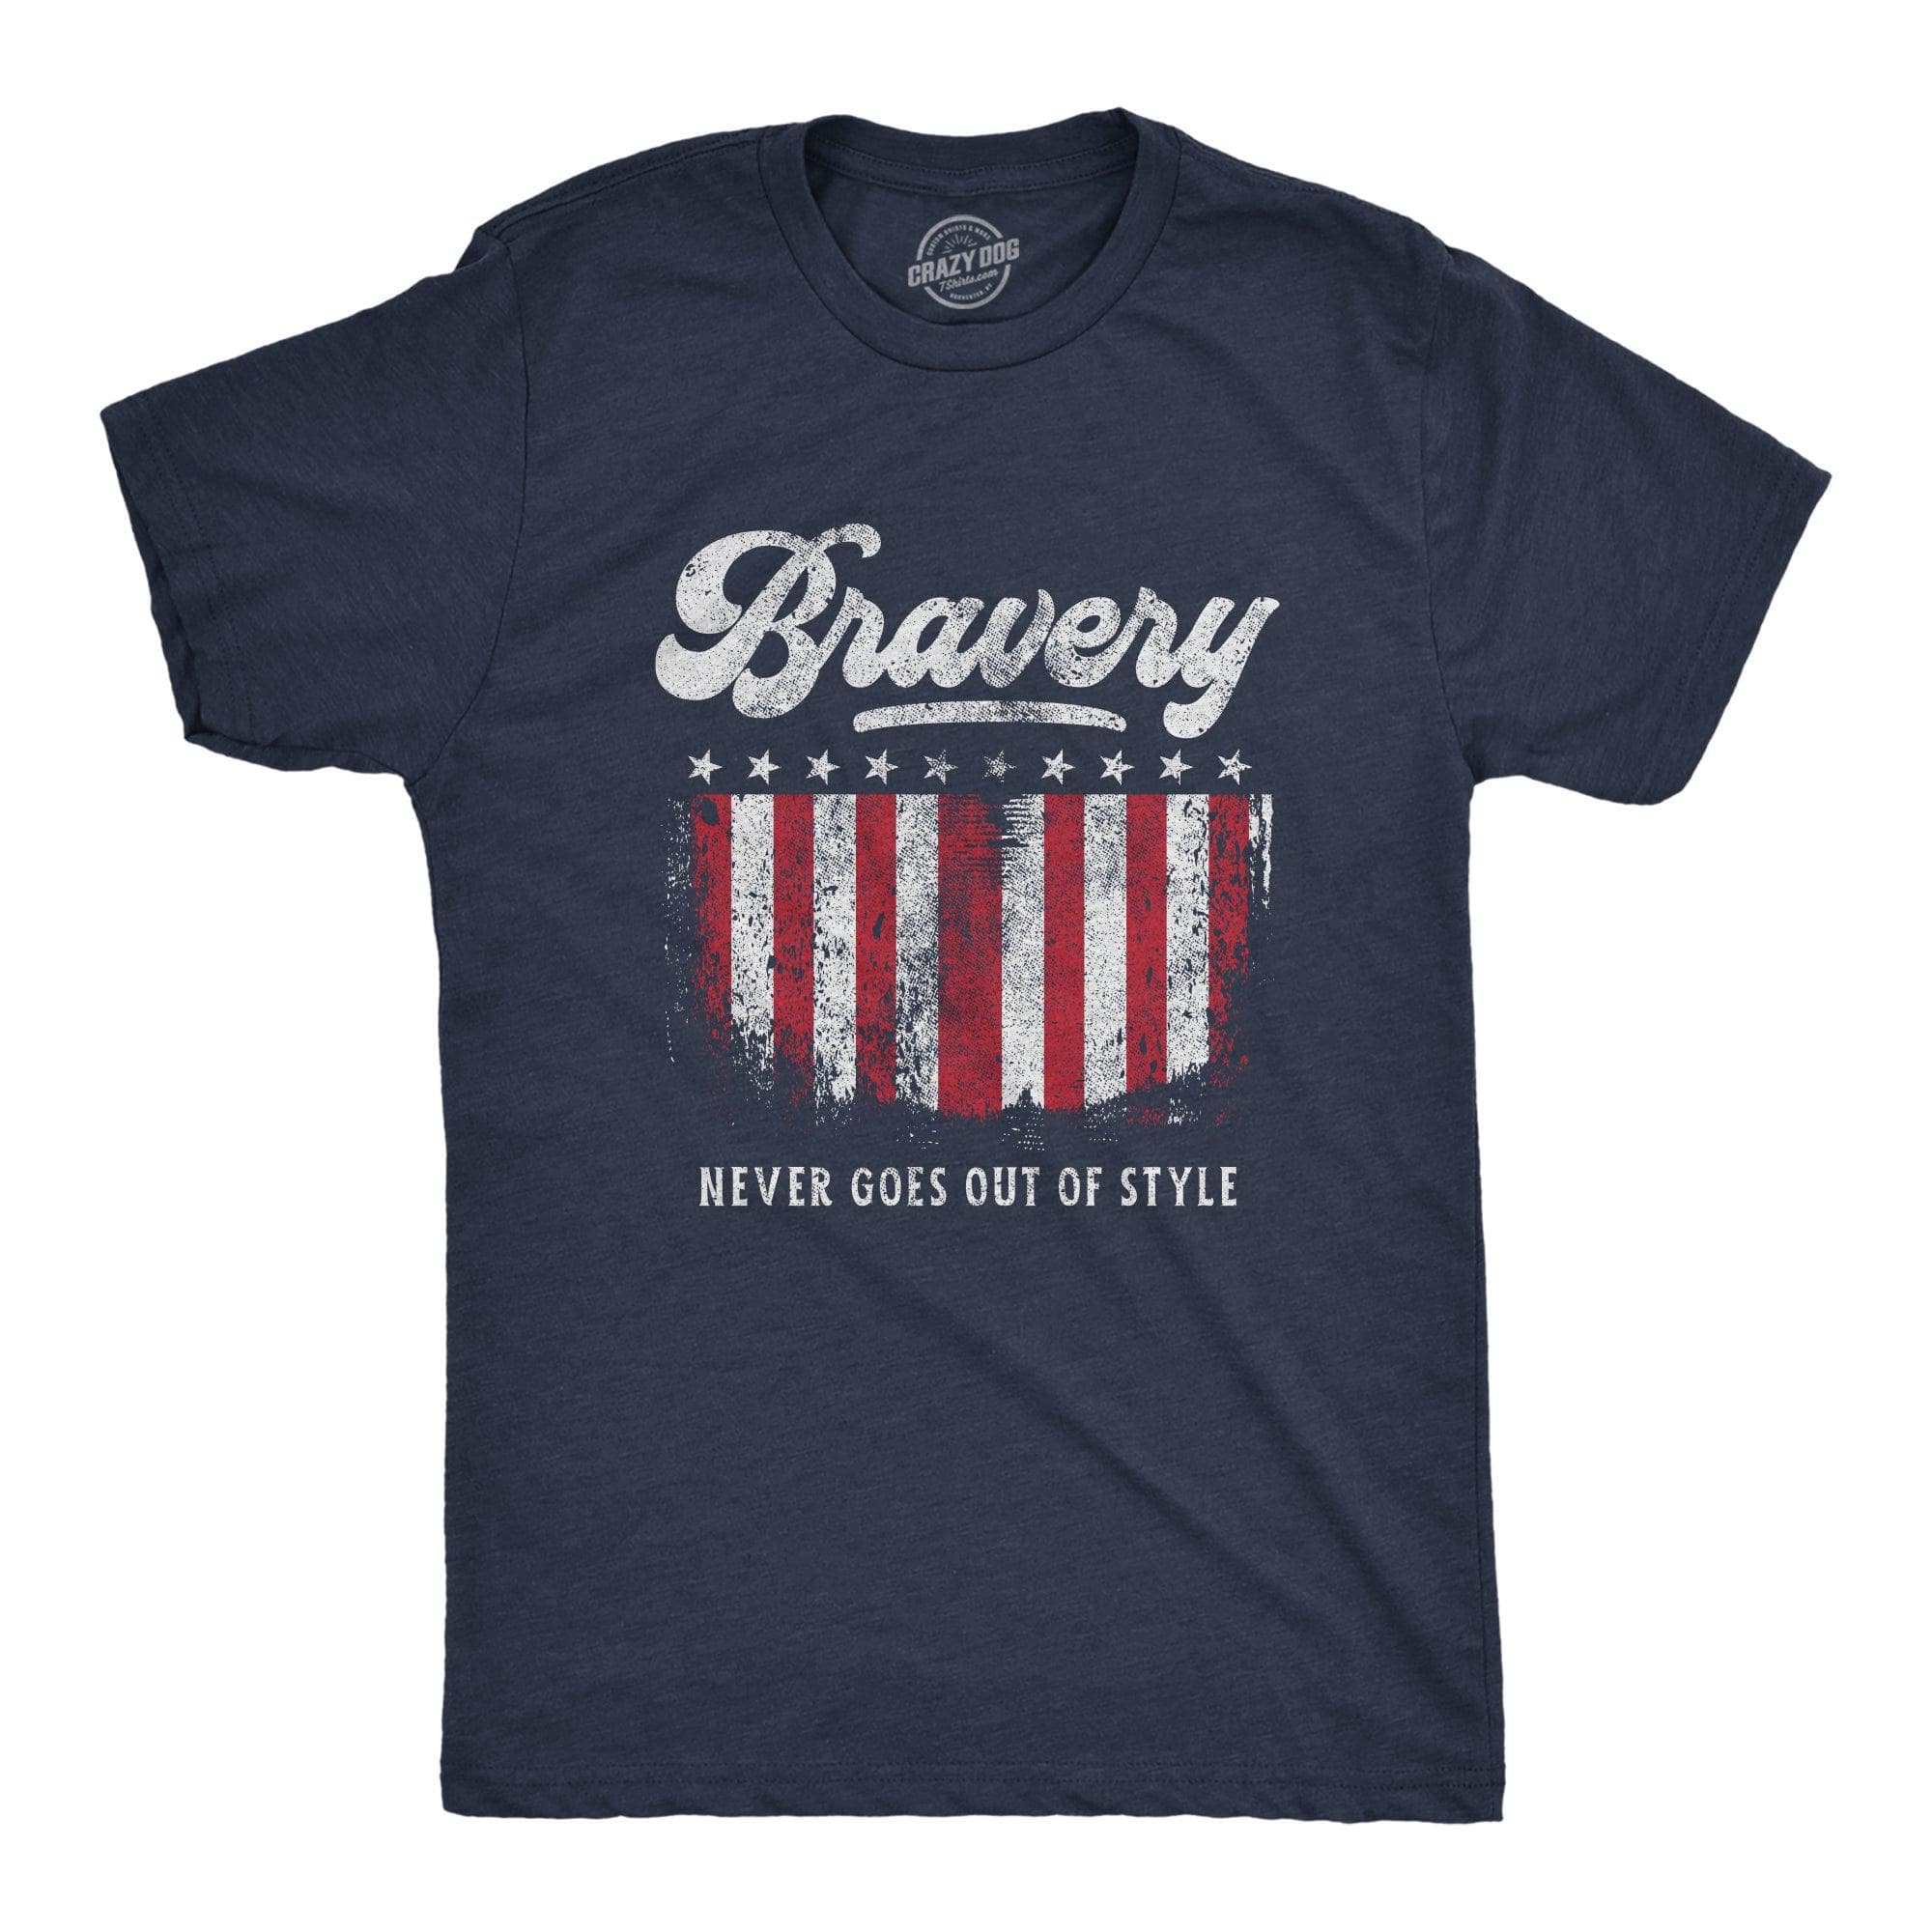 Bravery Never Goes Out Of Style Men's Tshirt  -  Crazy Dog T-Shirts